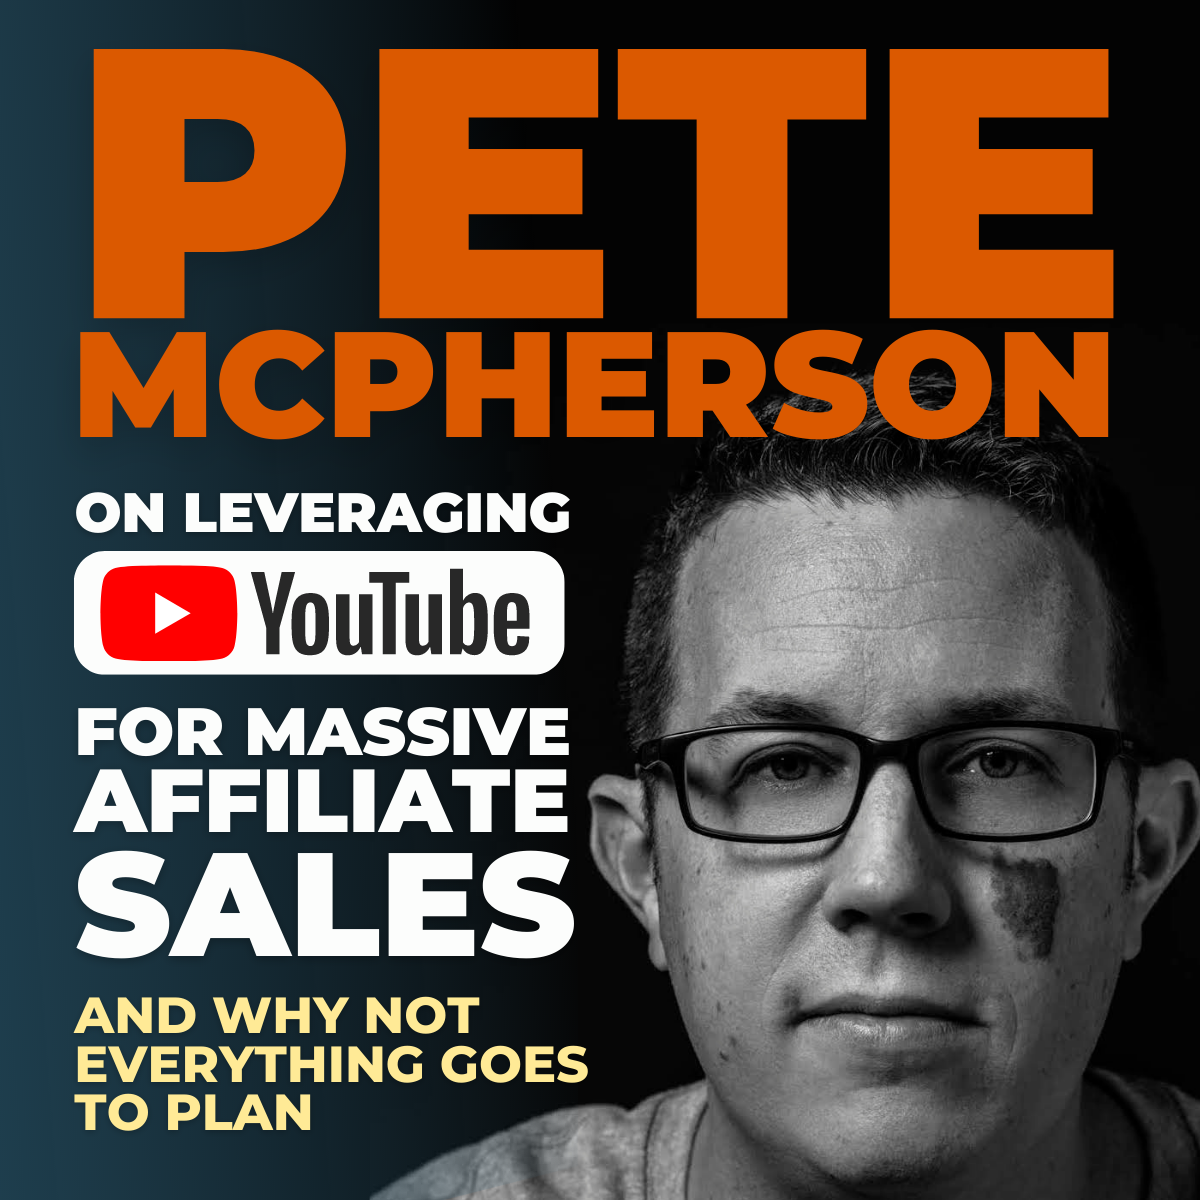 Pete McPherson on leveraging YouTube for massive affiliate sales & why not everything goes to plan